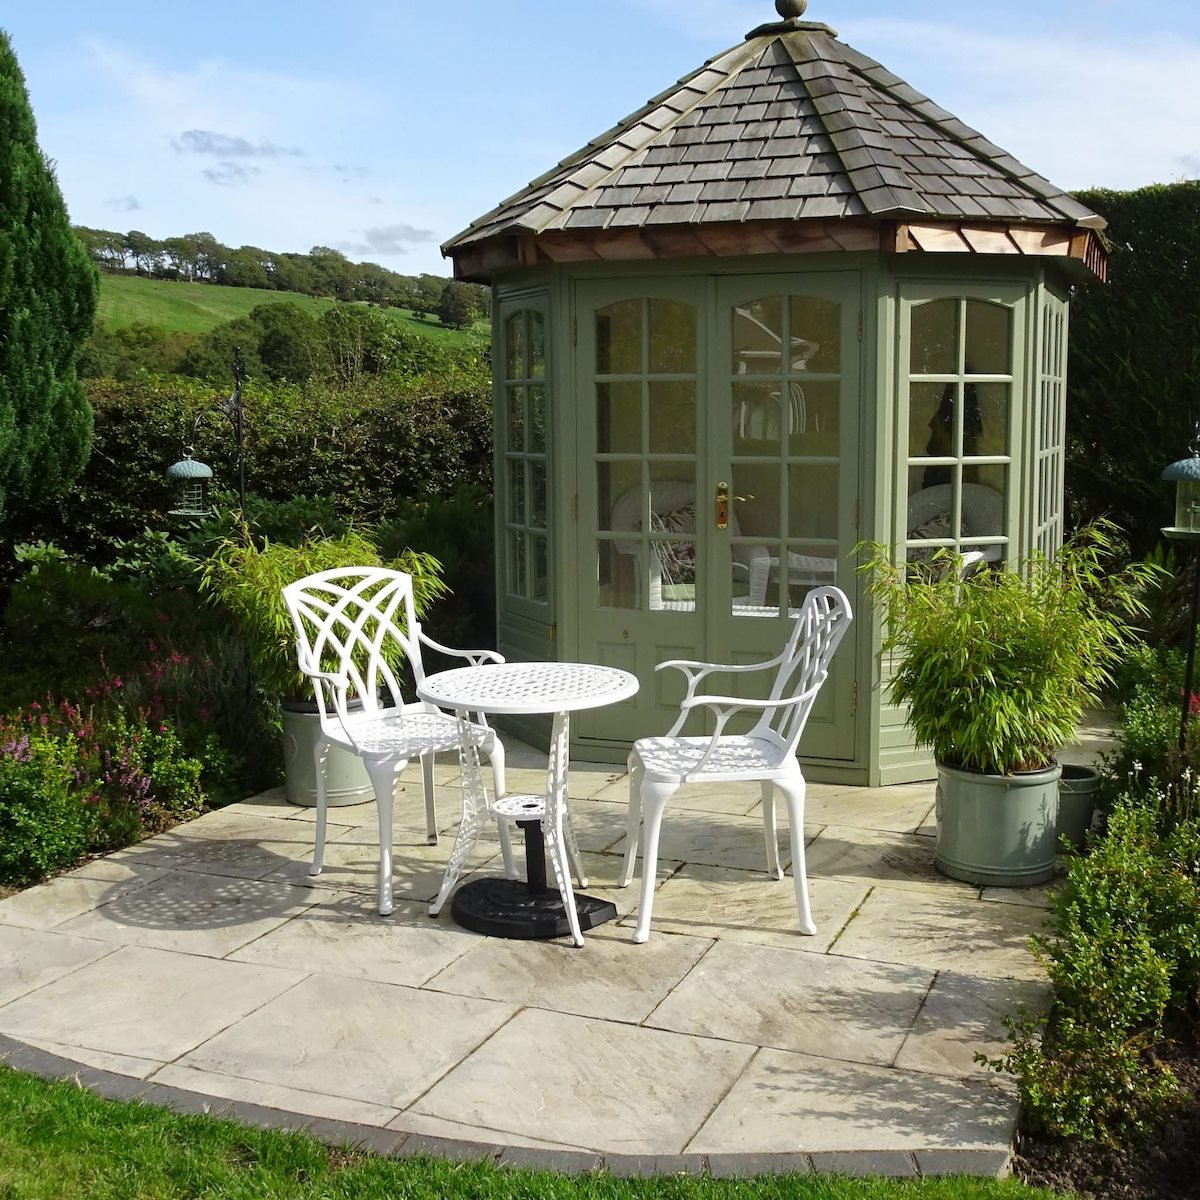 What is the best type of garden furniture for your needs? 